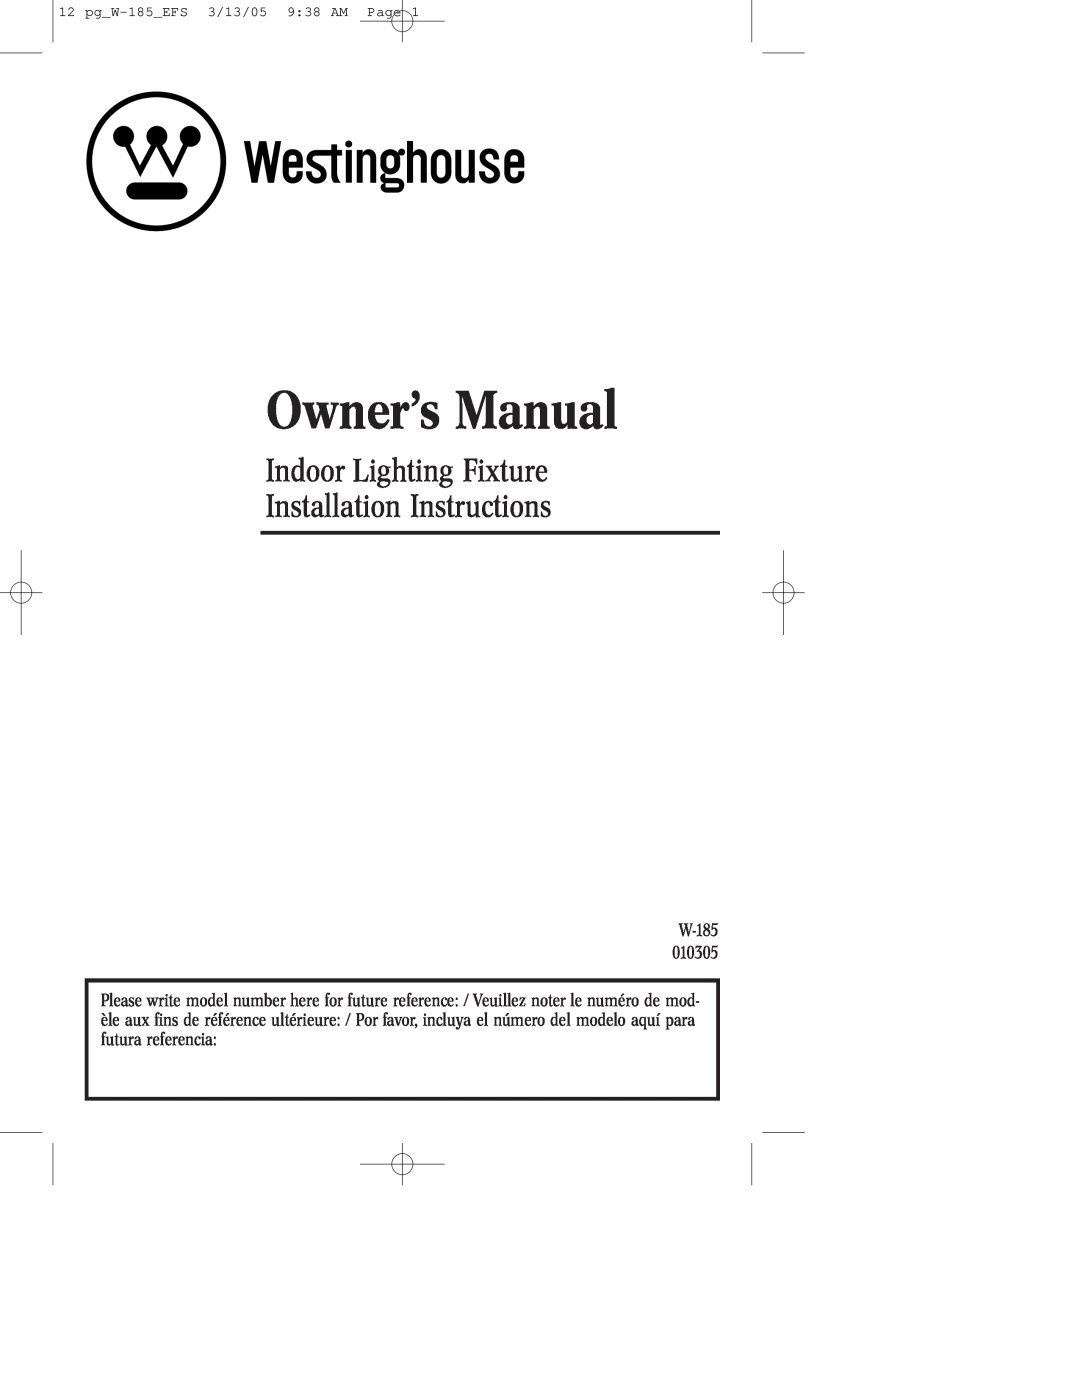 Westinghouse W-185 owner manual Indoor Lighting Fixture Installation Instructions 